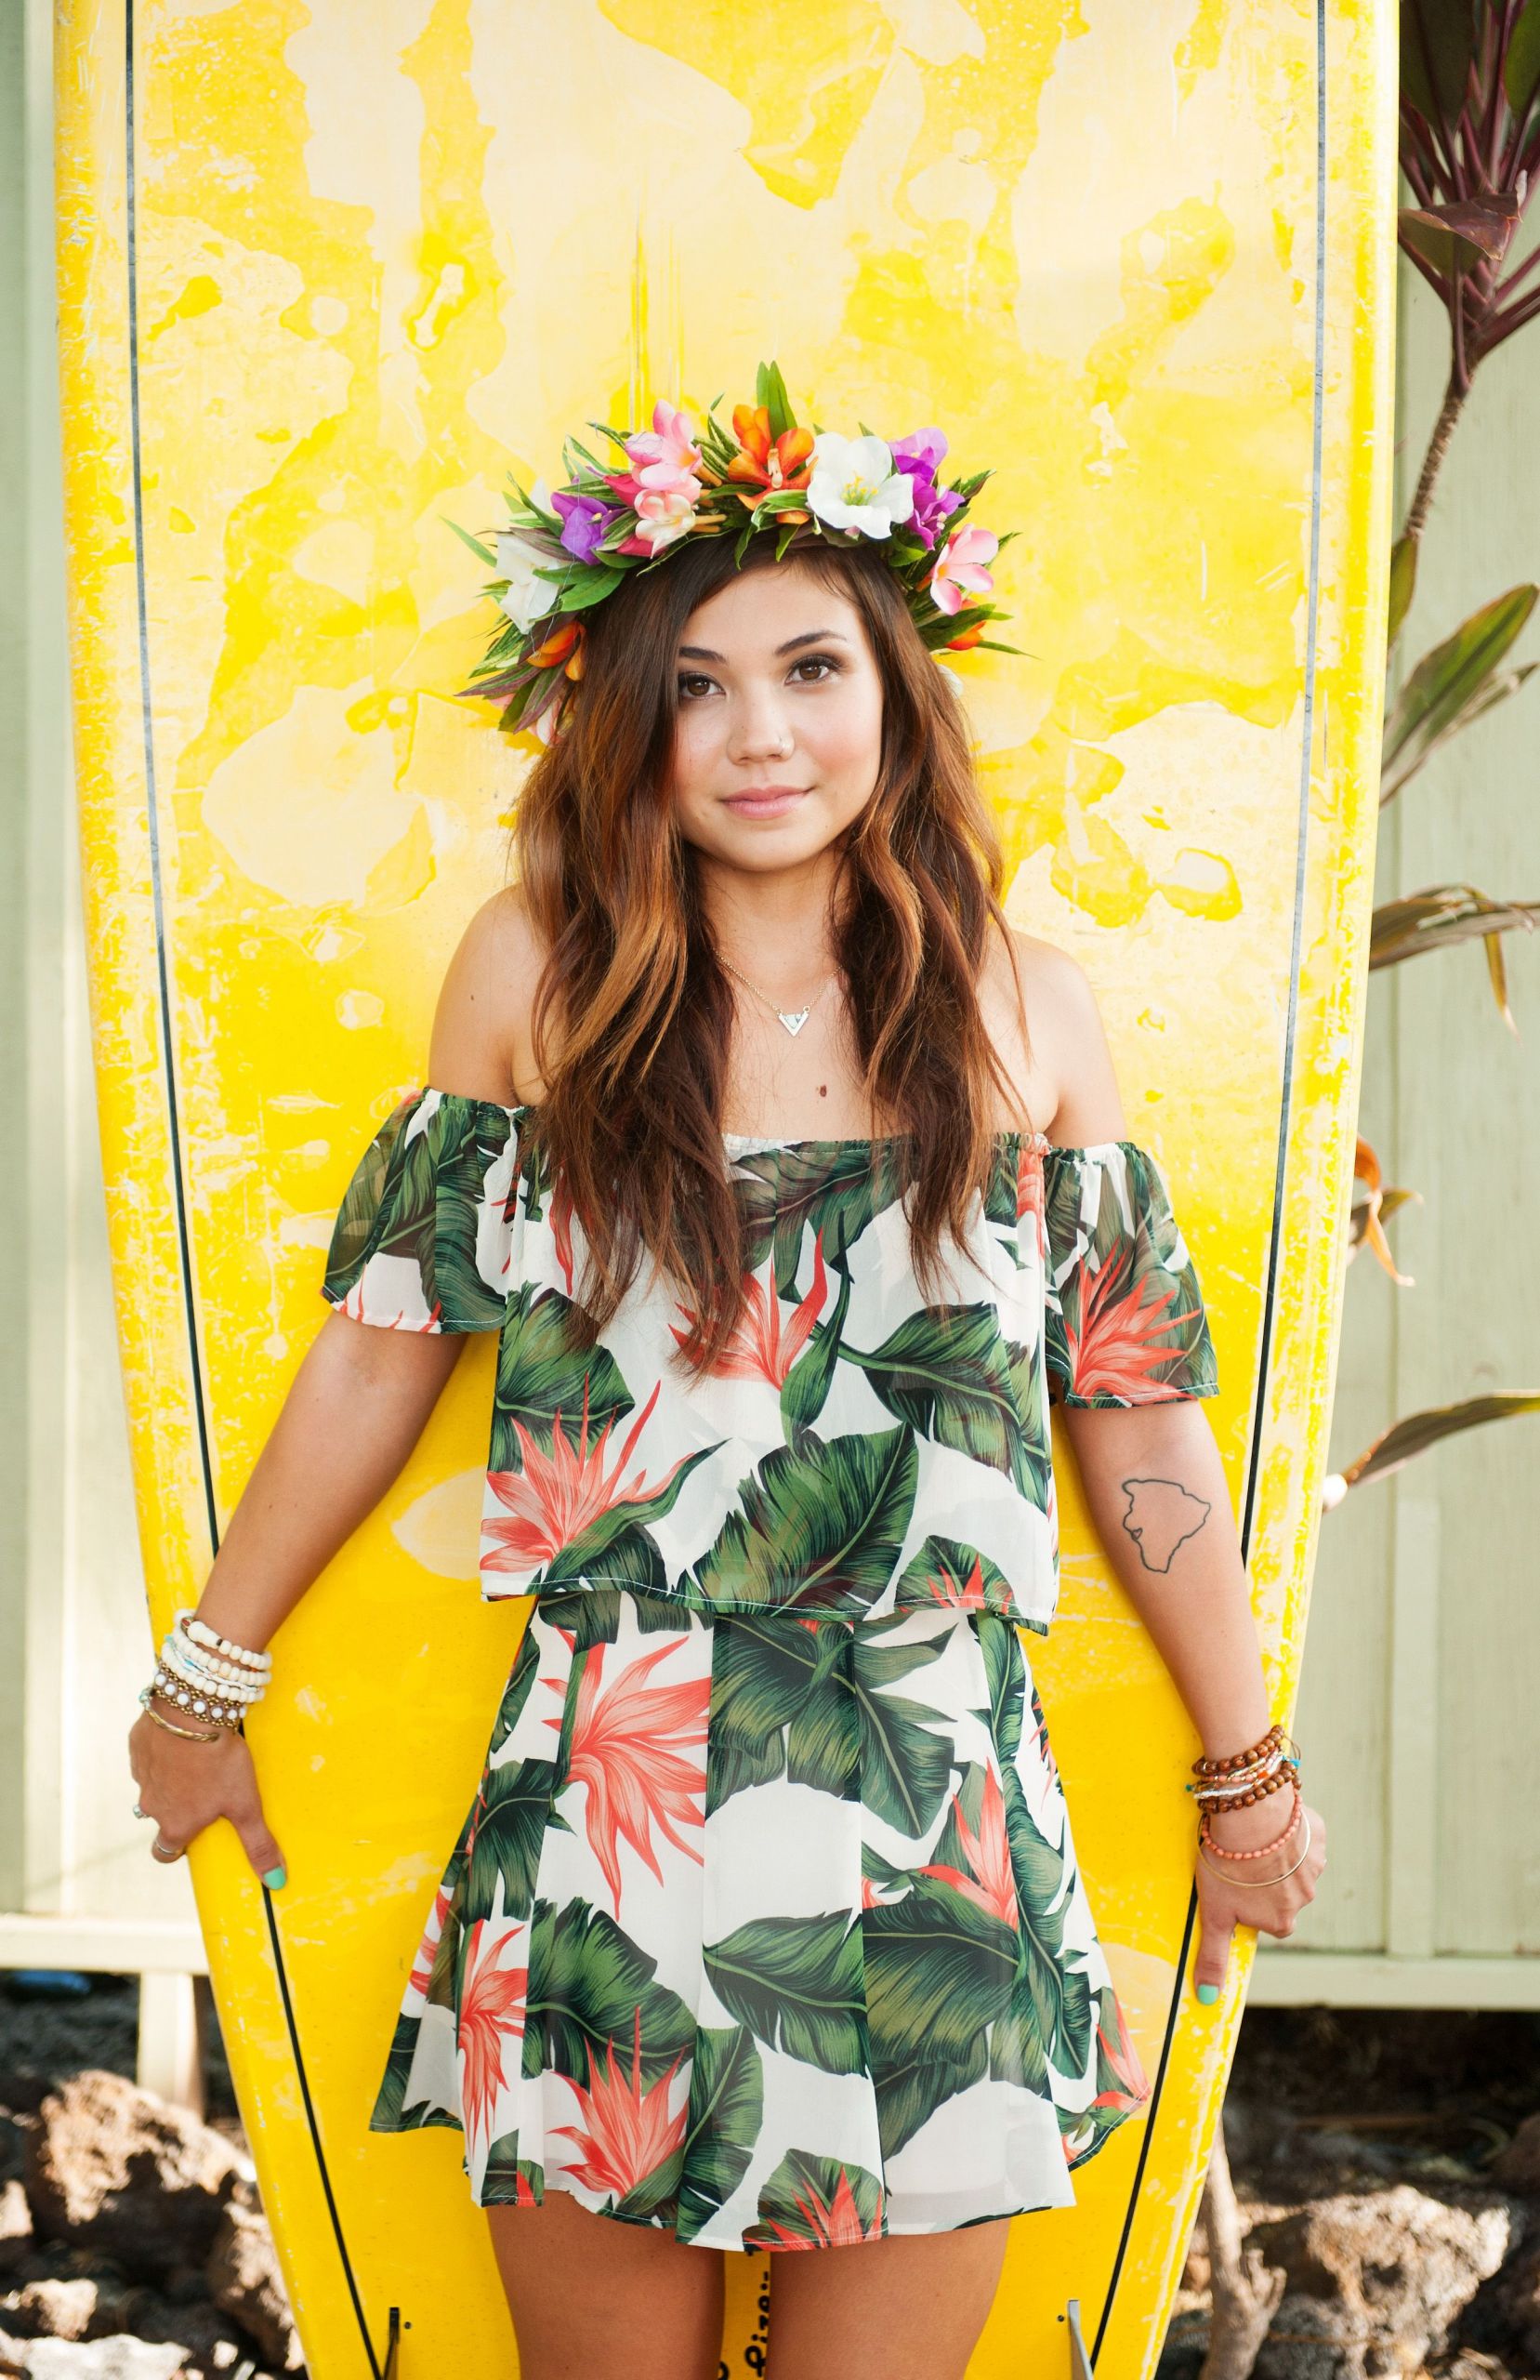 Summer Costume Party Ideas
 Nothing beats summer at the beach in Show Me Your Mumu